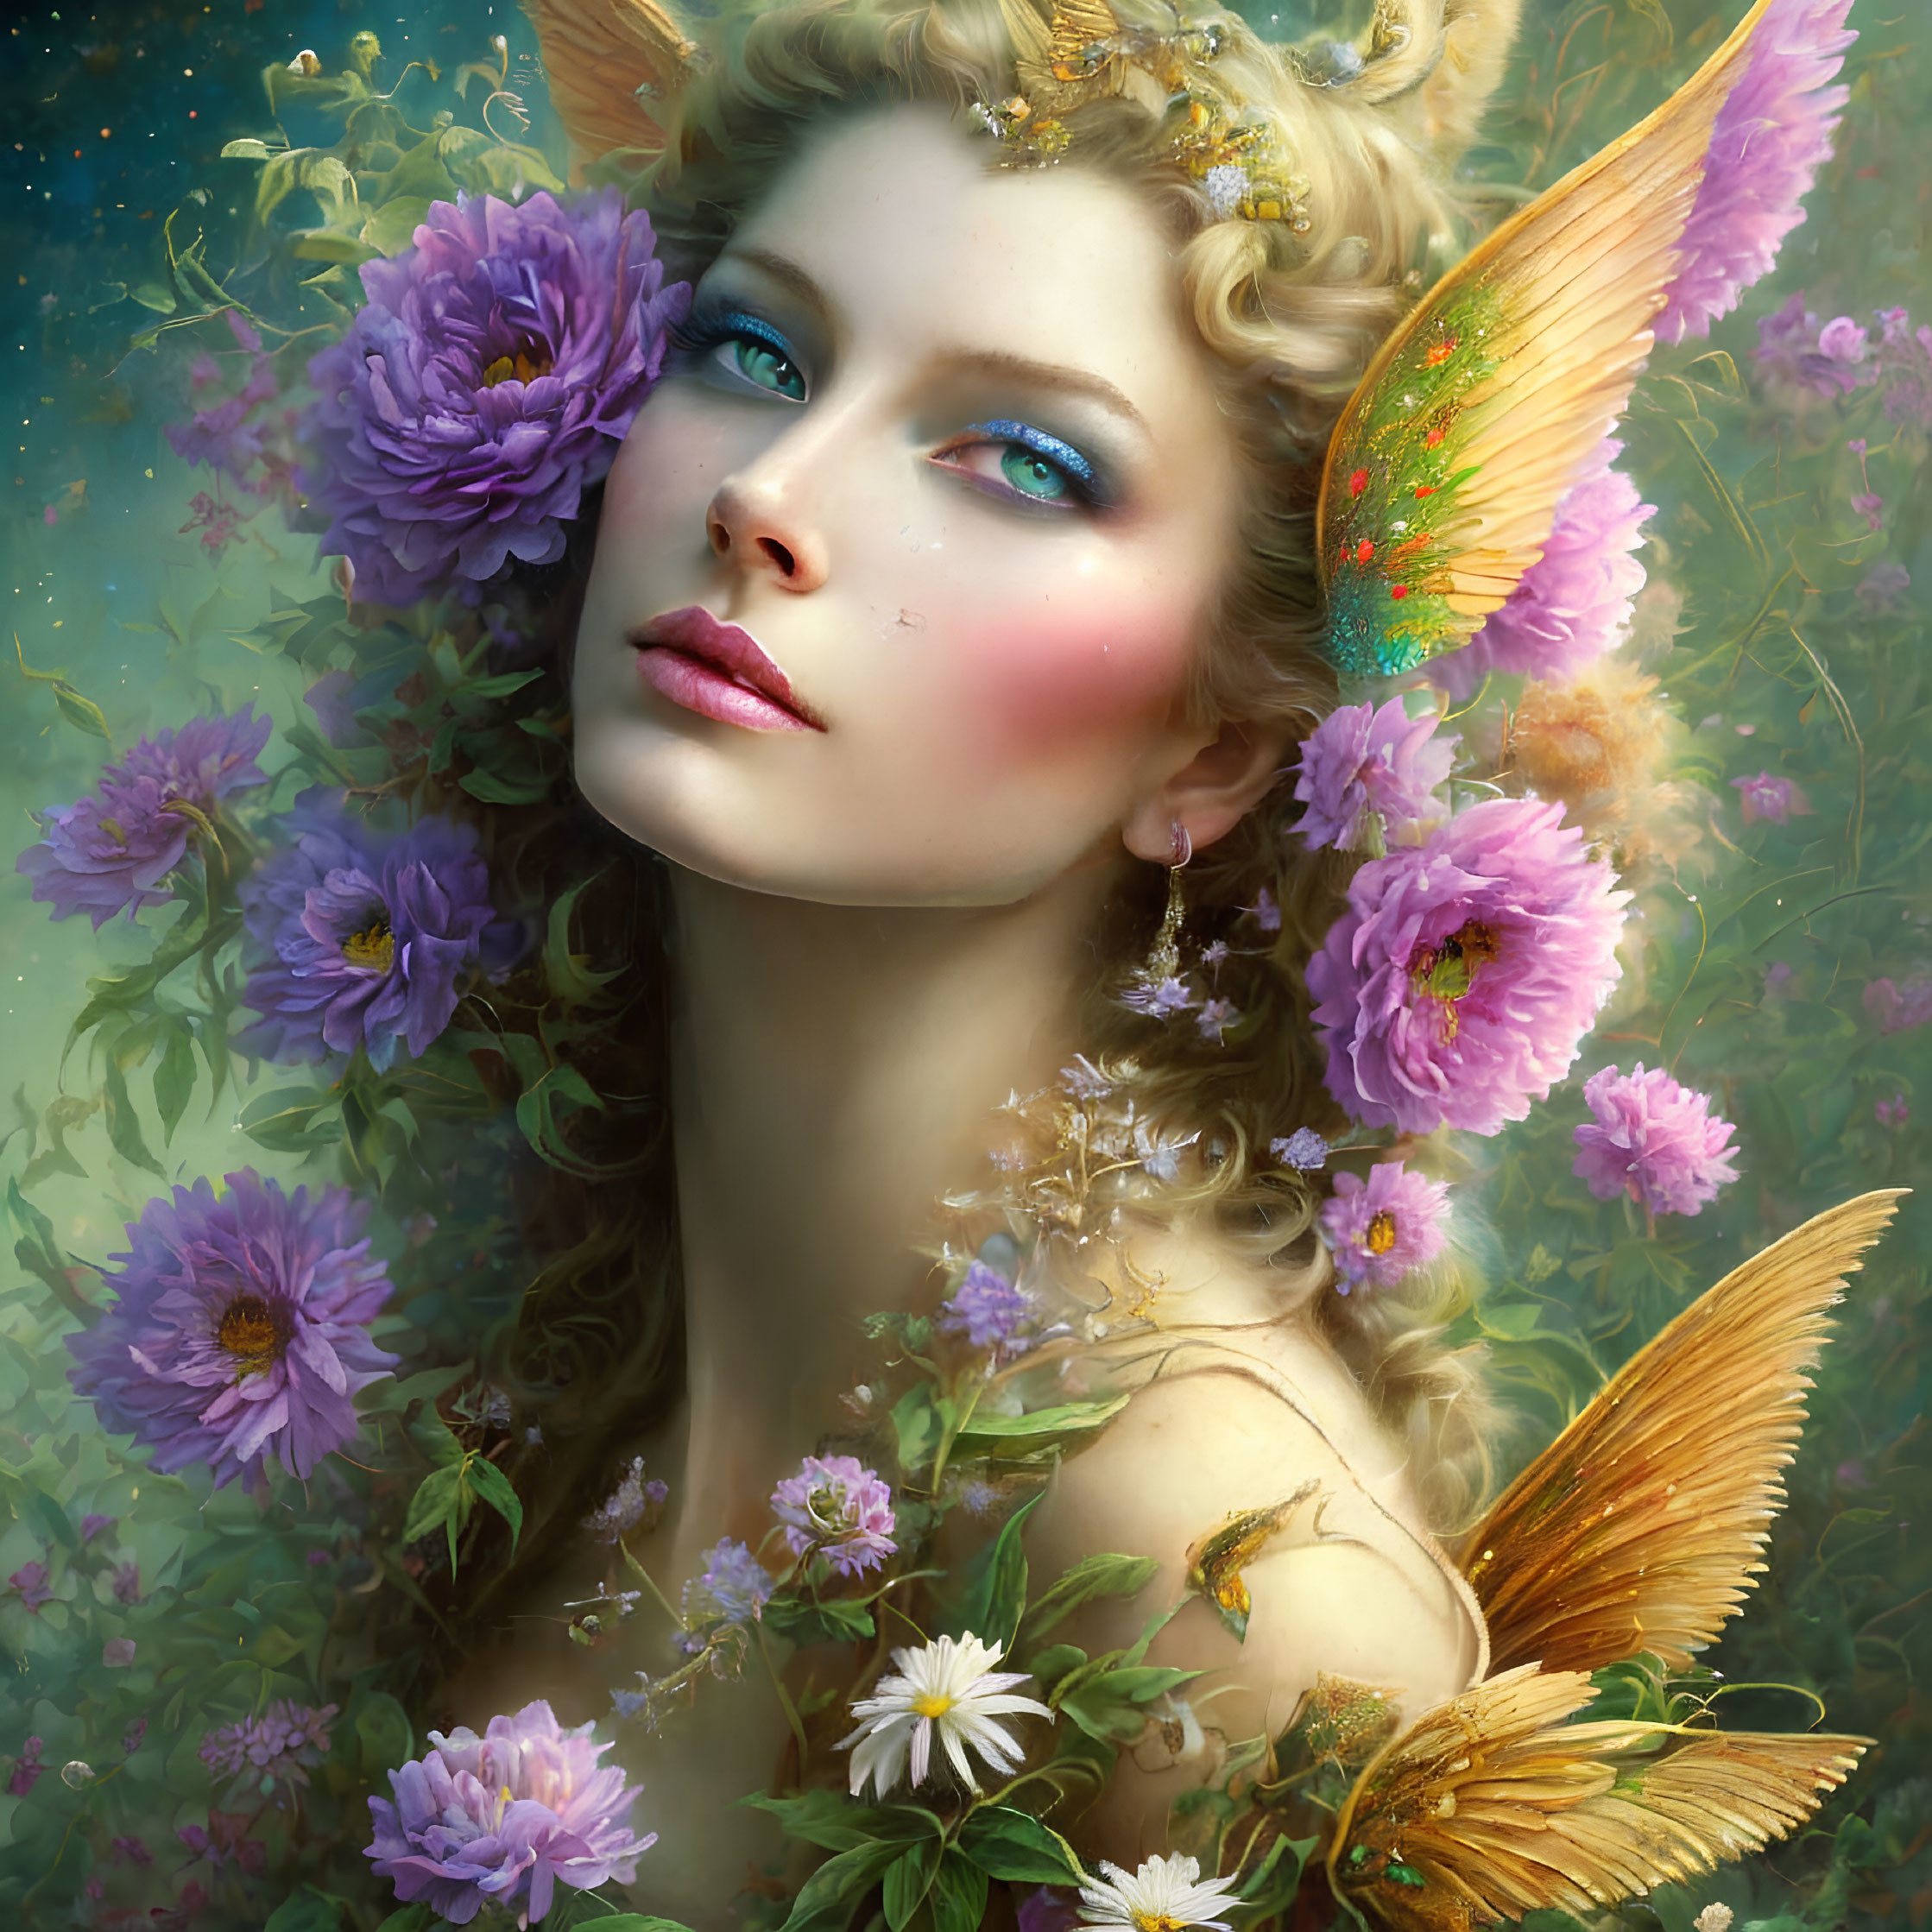 Fantastical image of fair-skinned woman with butterfly wings in lush floral setting